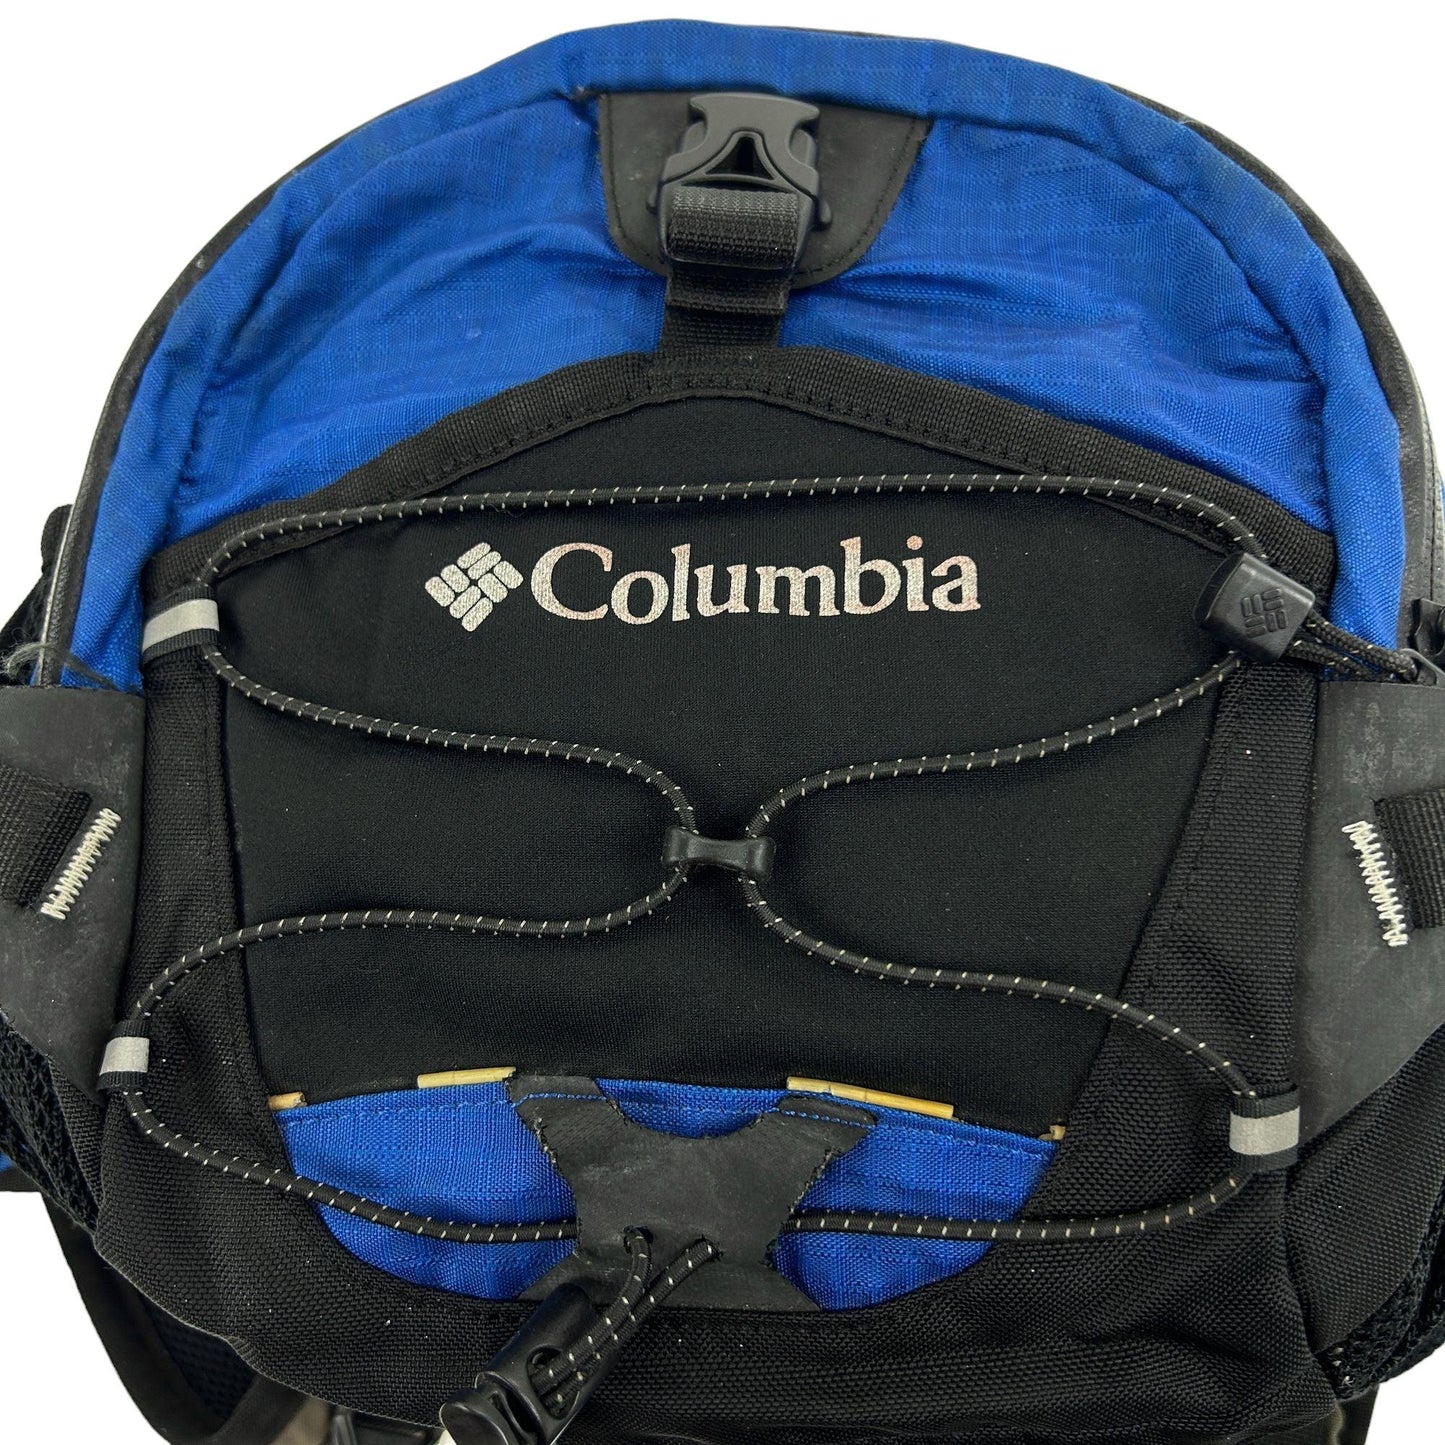 Vintage Columbia Outdoor Waist Bag - Known Source